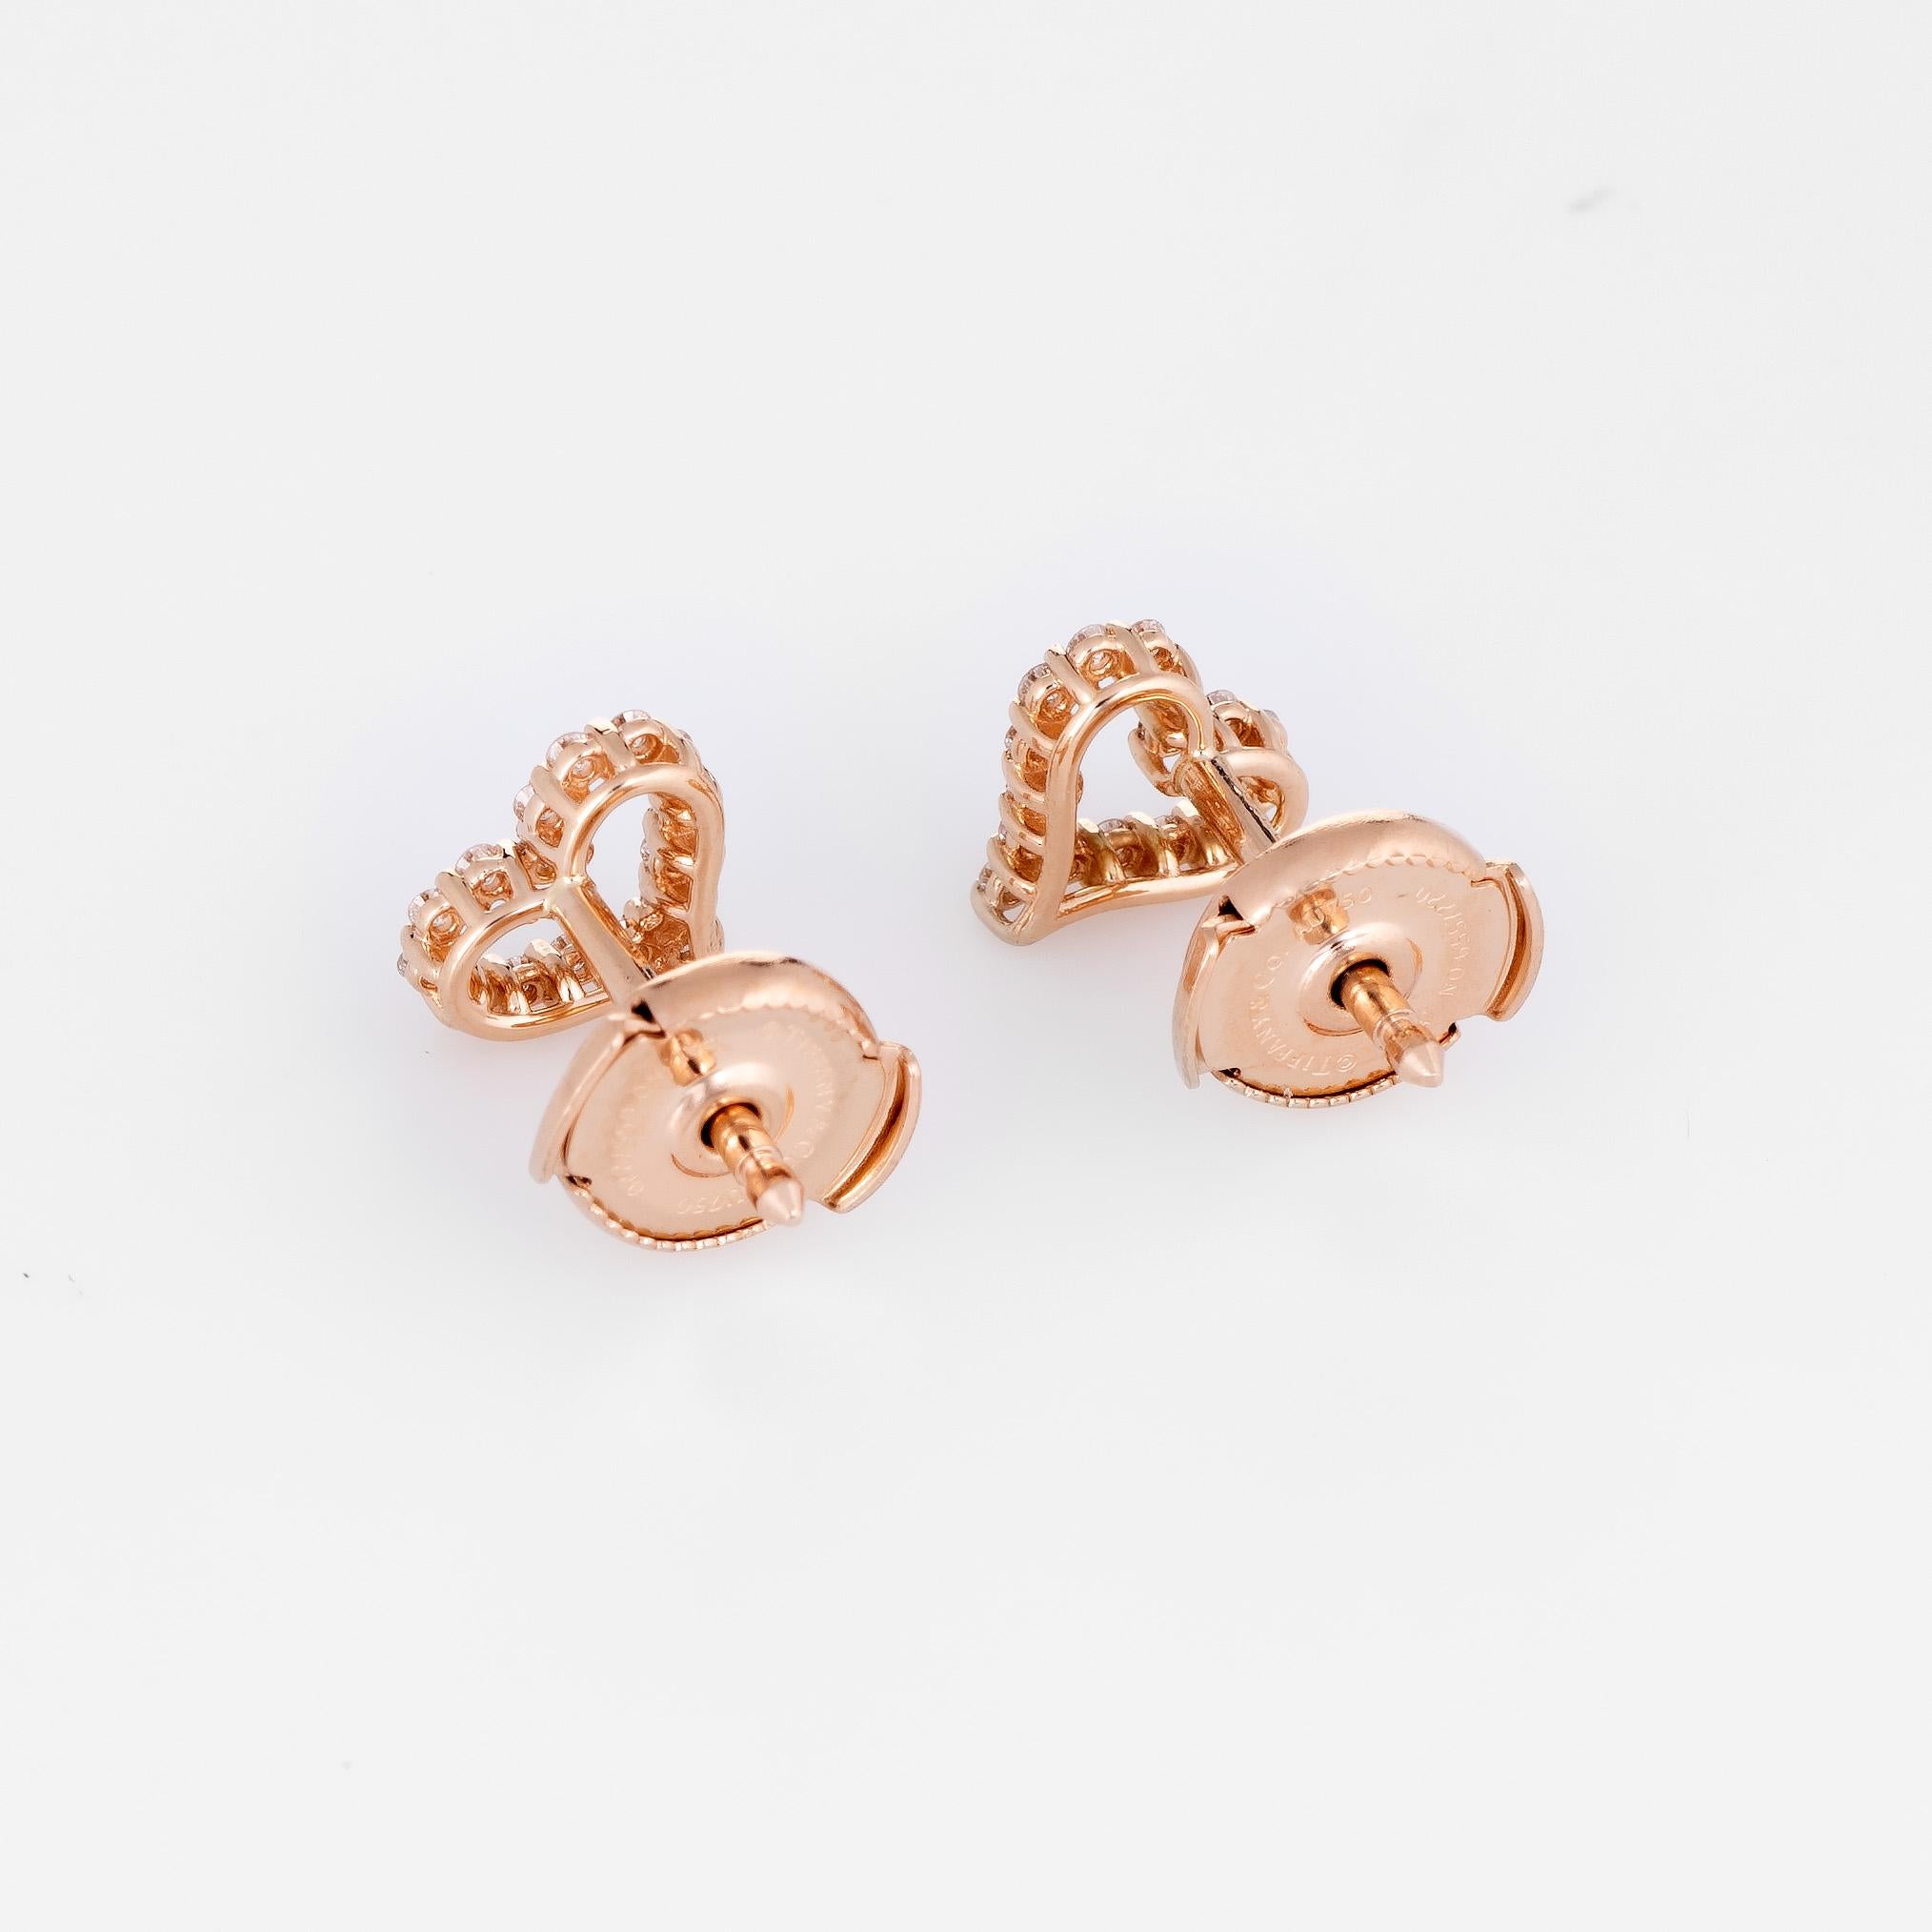 Elegant pair of Tiffany & Co diamond heart earrings crafted in 18k white gold. 

Round brilliant cut diamonds total 0.13 carats (estimated at F-G color and VVS2 clarity). 

The 'extra mini' earrings by Tiffany & Co are crafted in 18k rose gold and